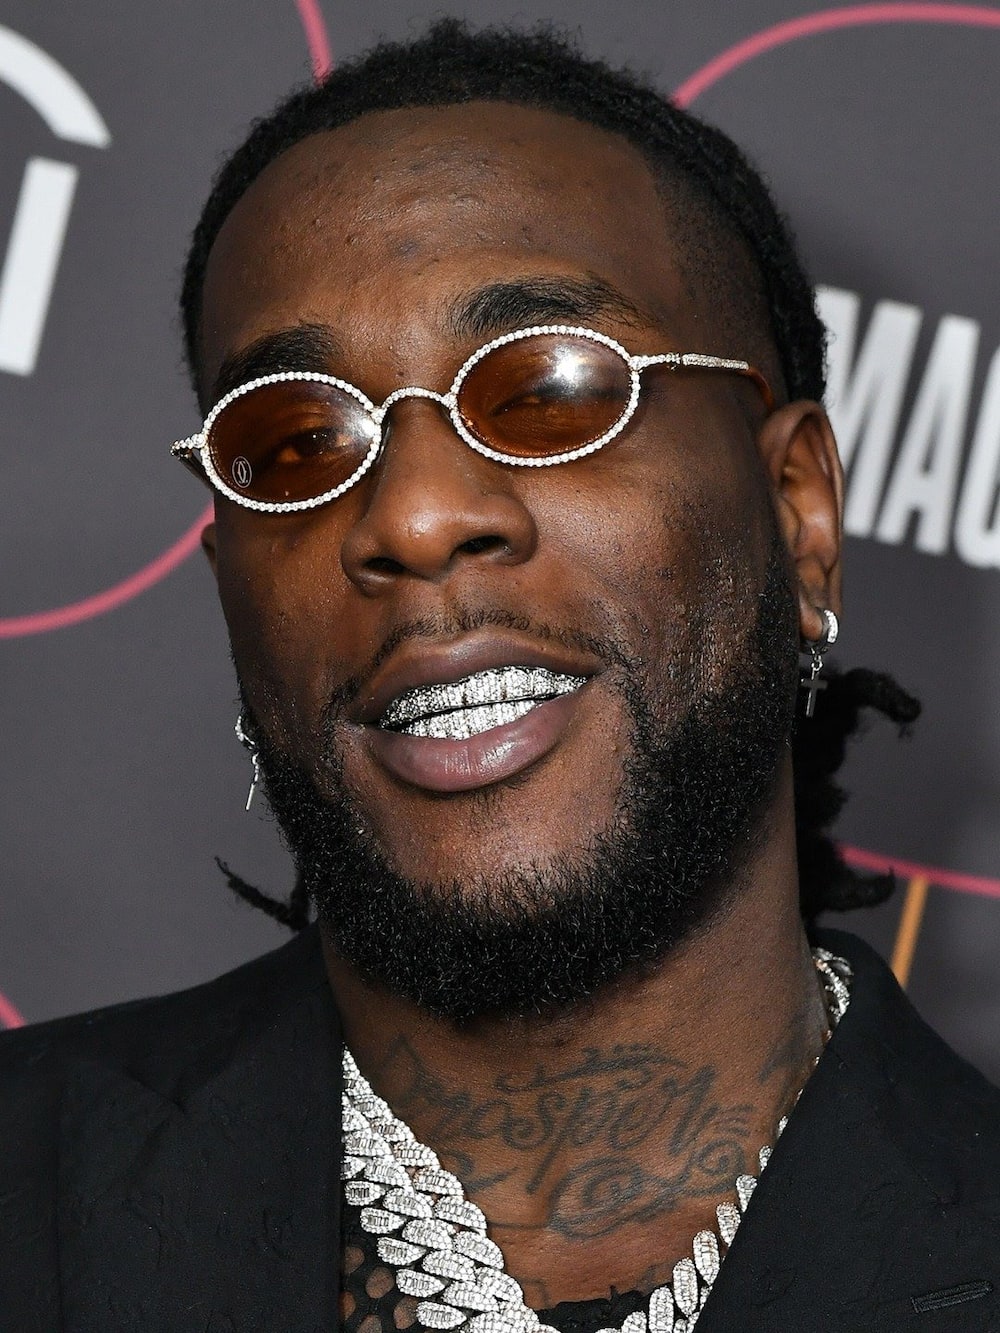 How old is Burnaboy?